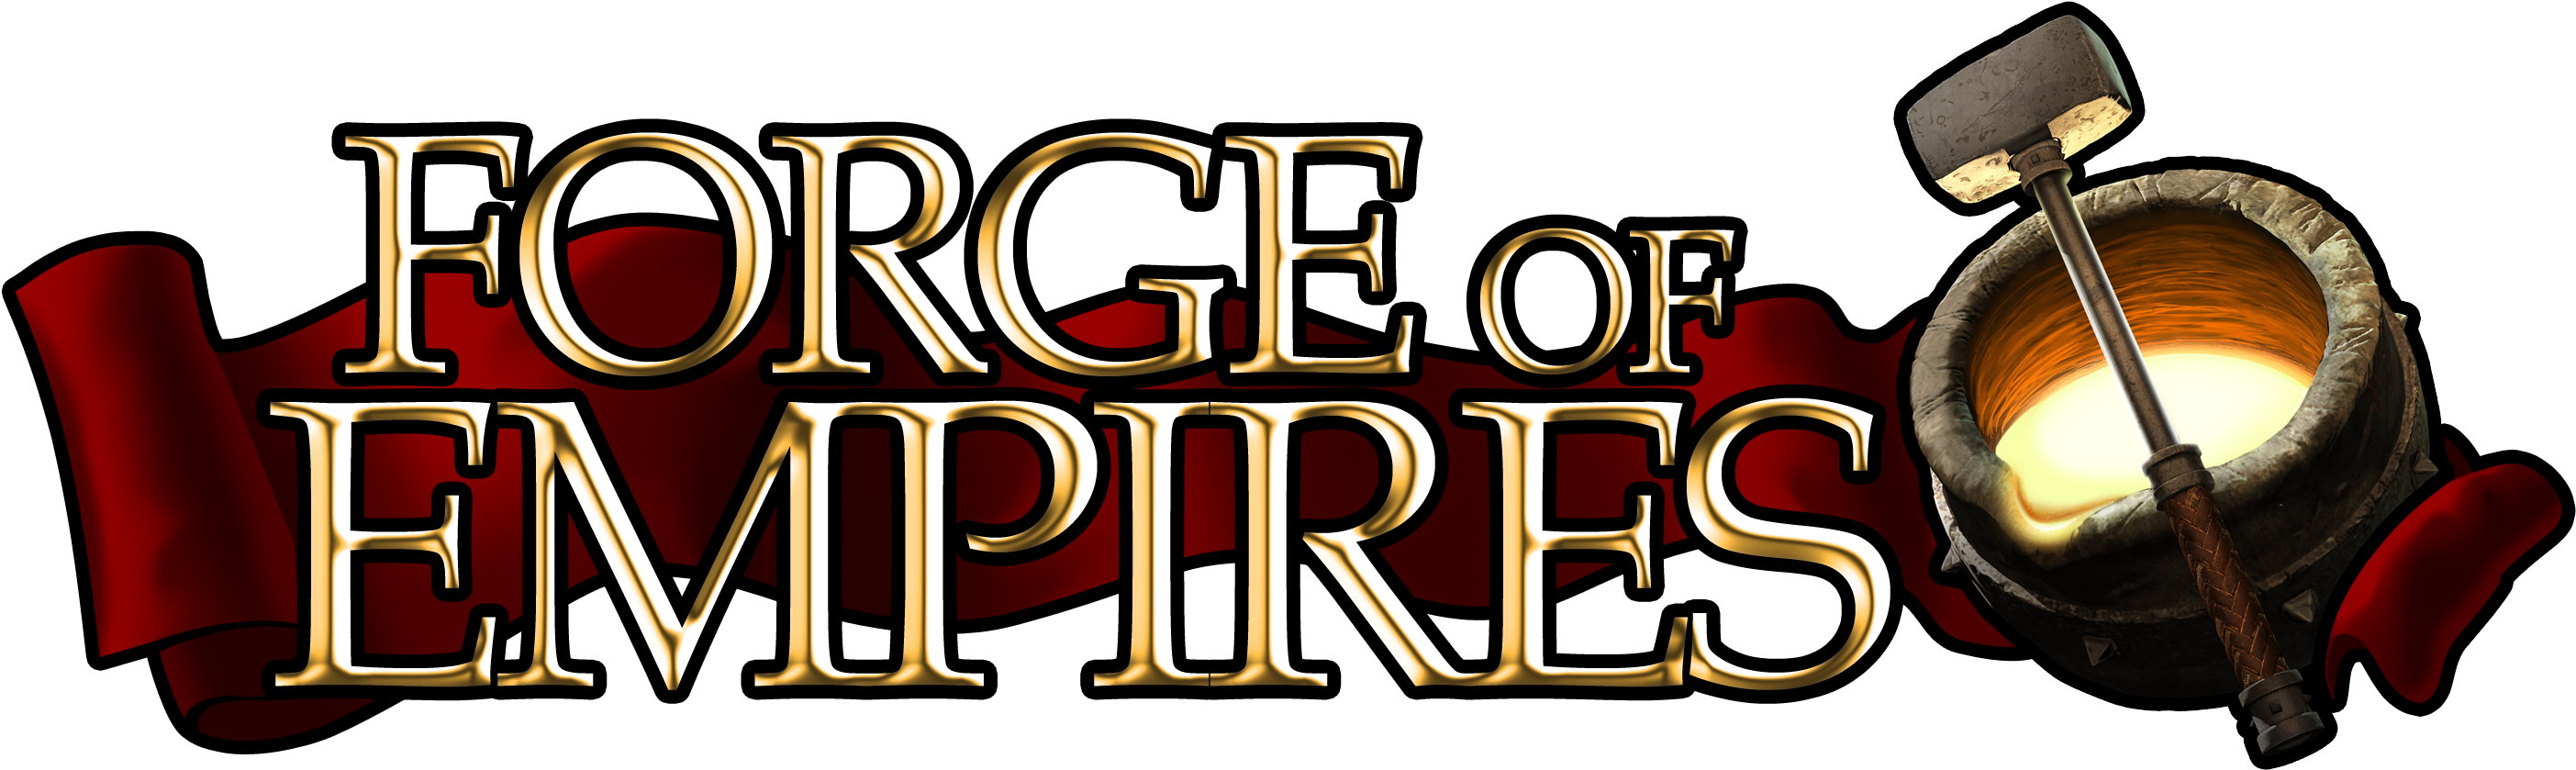 Forge of empires steam фото 93